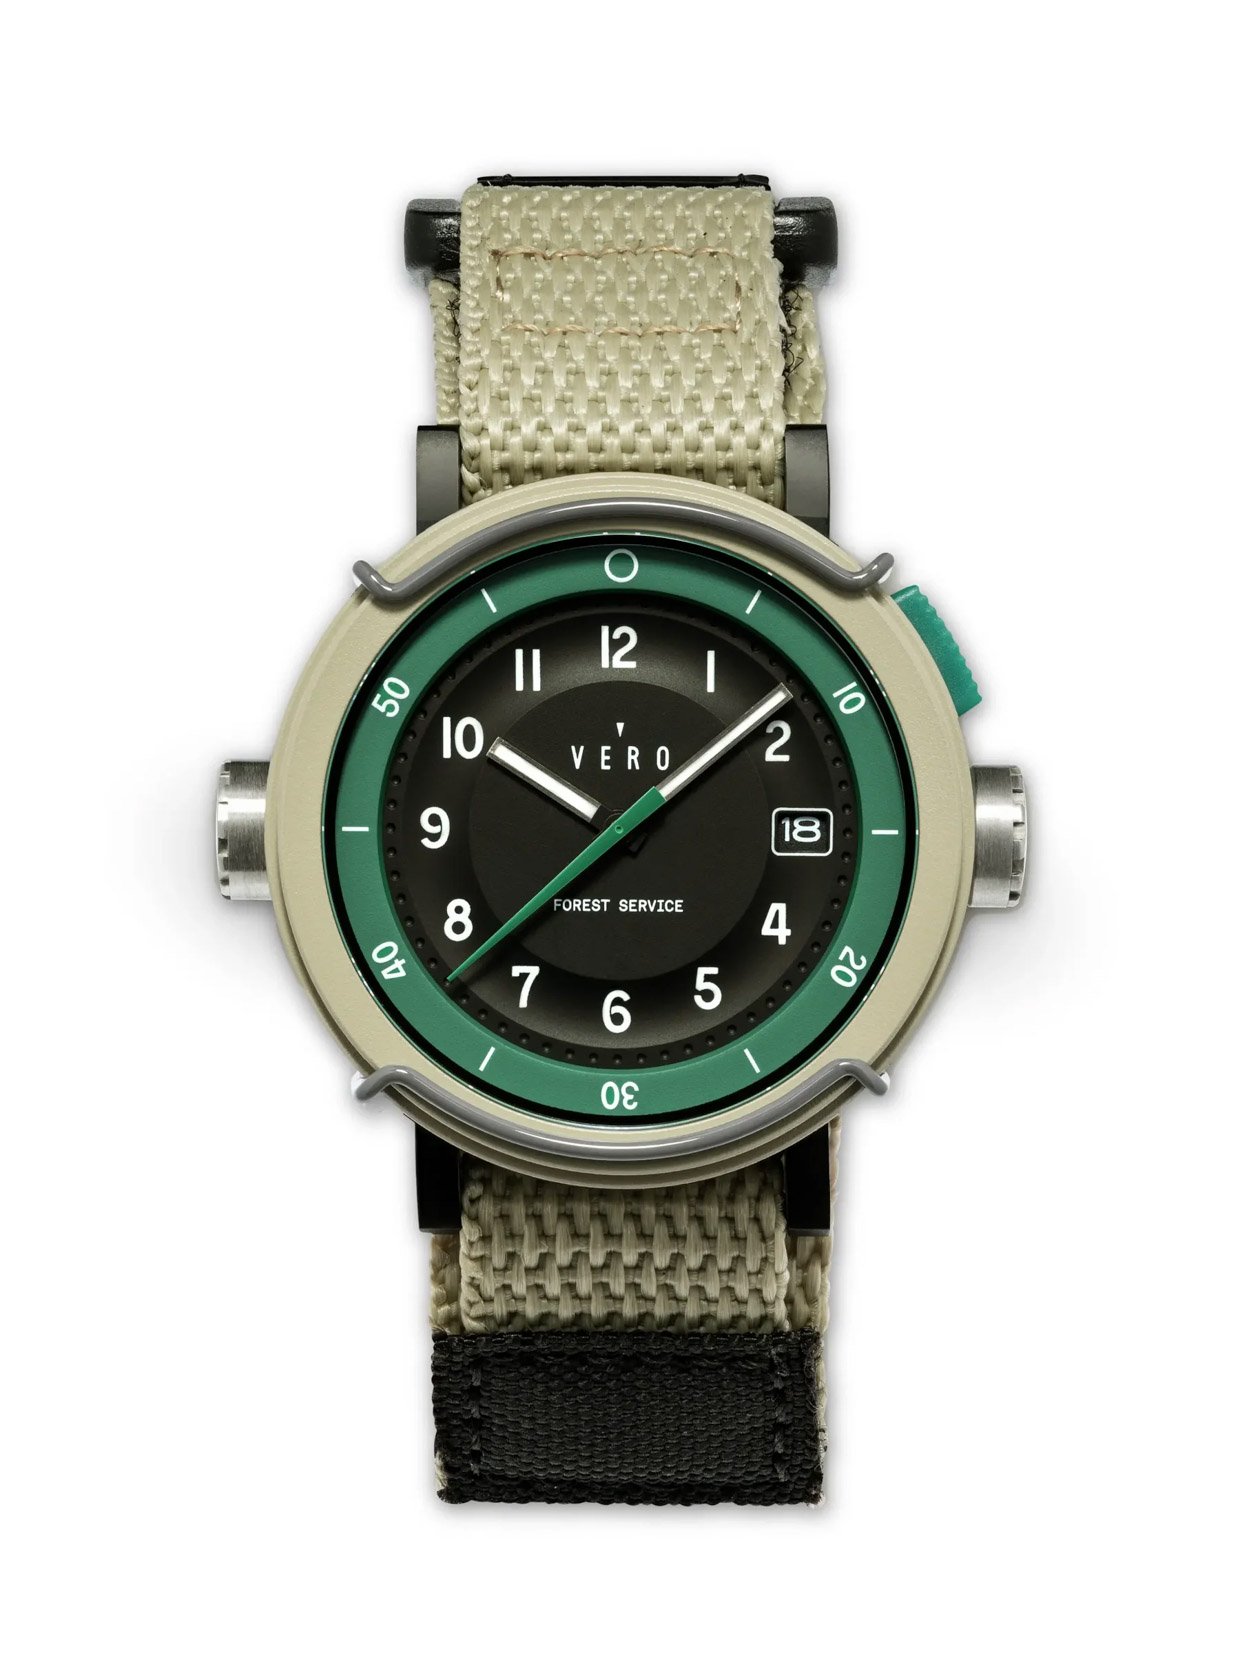 VERO Forest Service Edition Field Watches